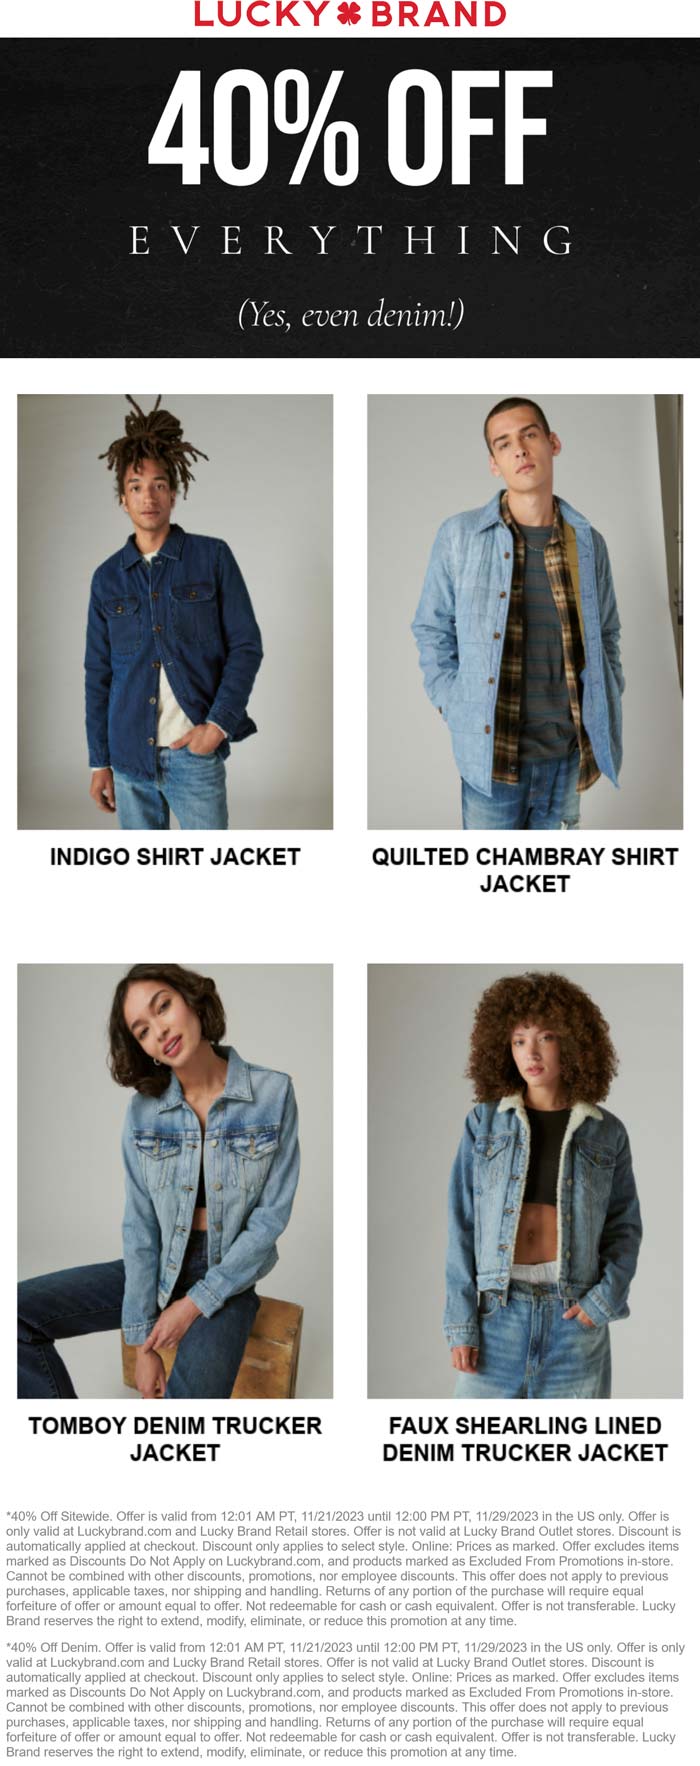 40% off everything online today at Lucky Brand #luckybrand